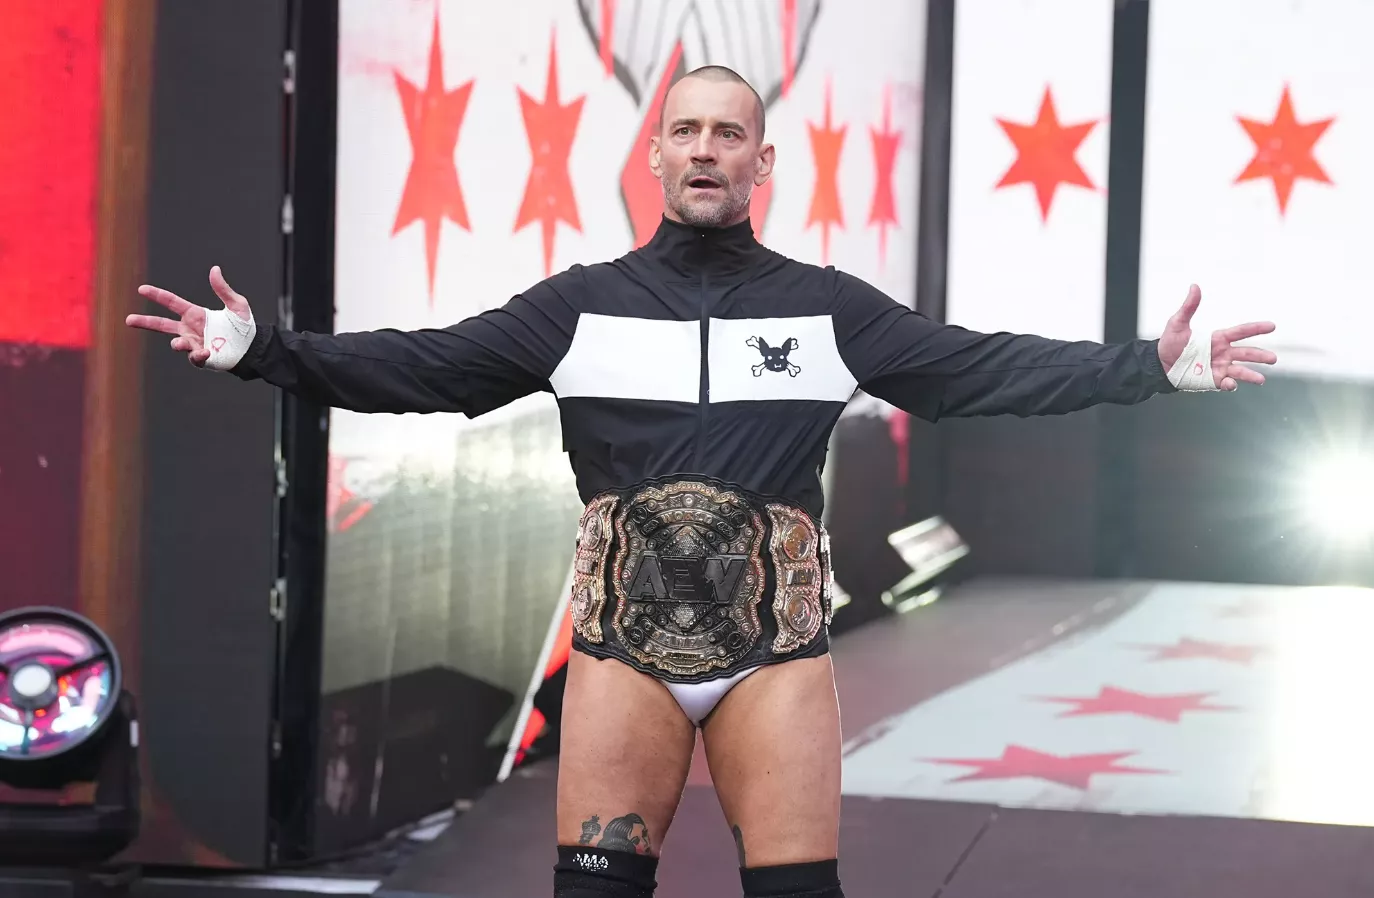 Why did AEW terminate CM Punk’s contract?